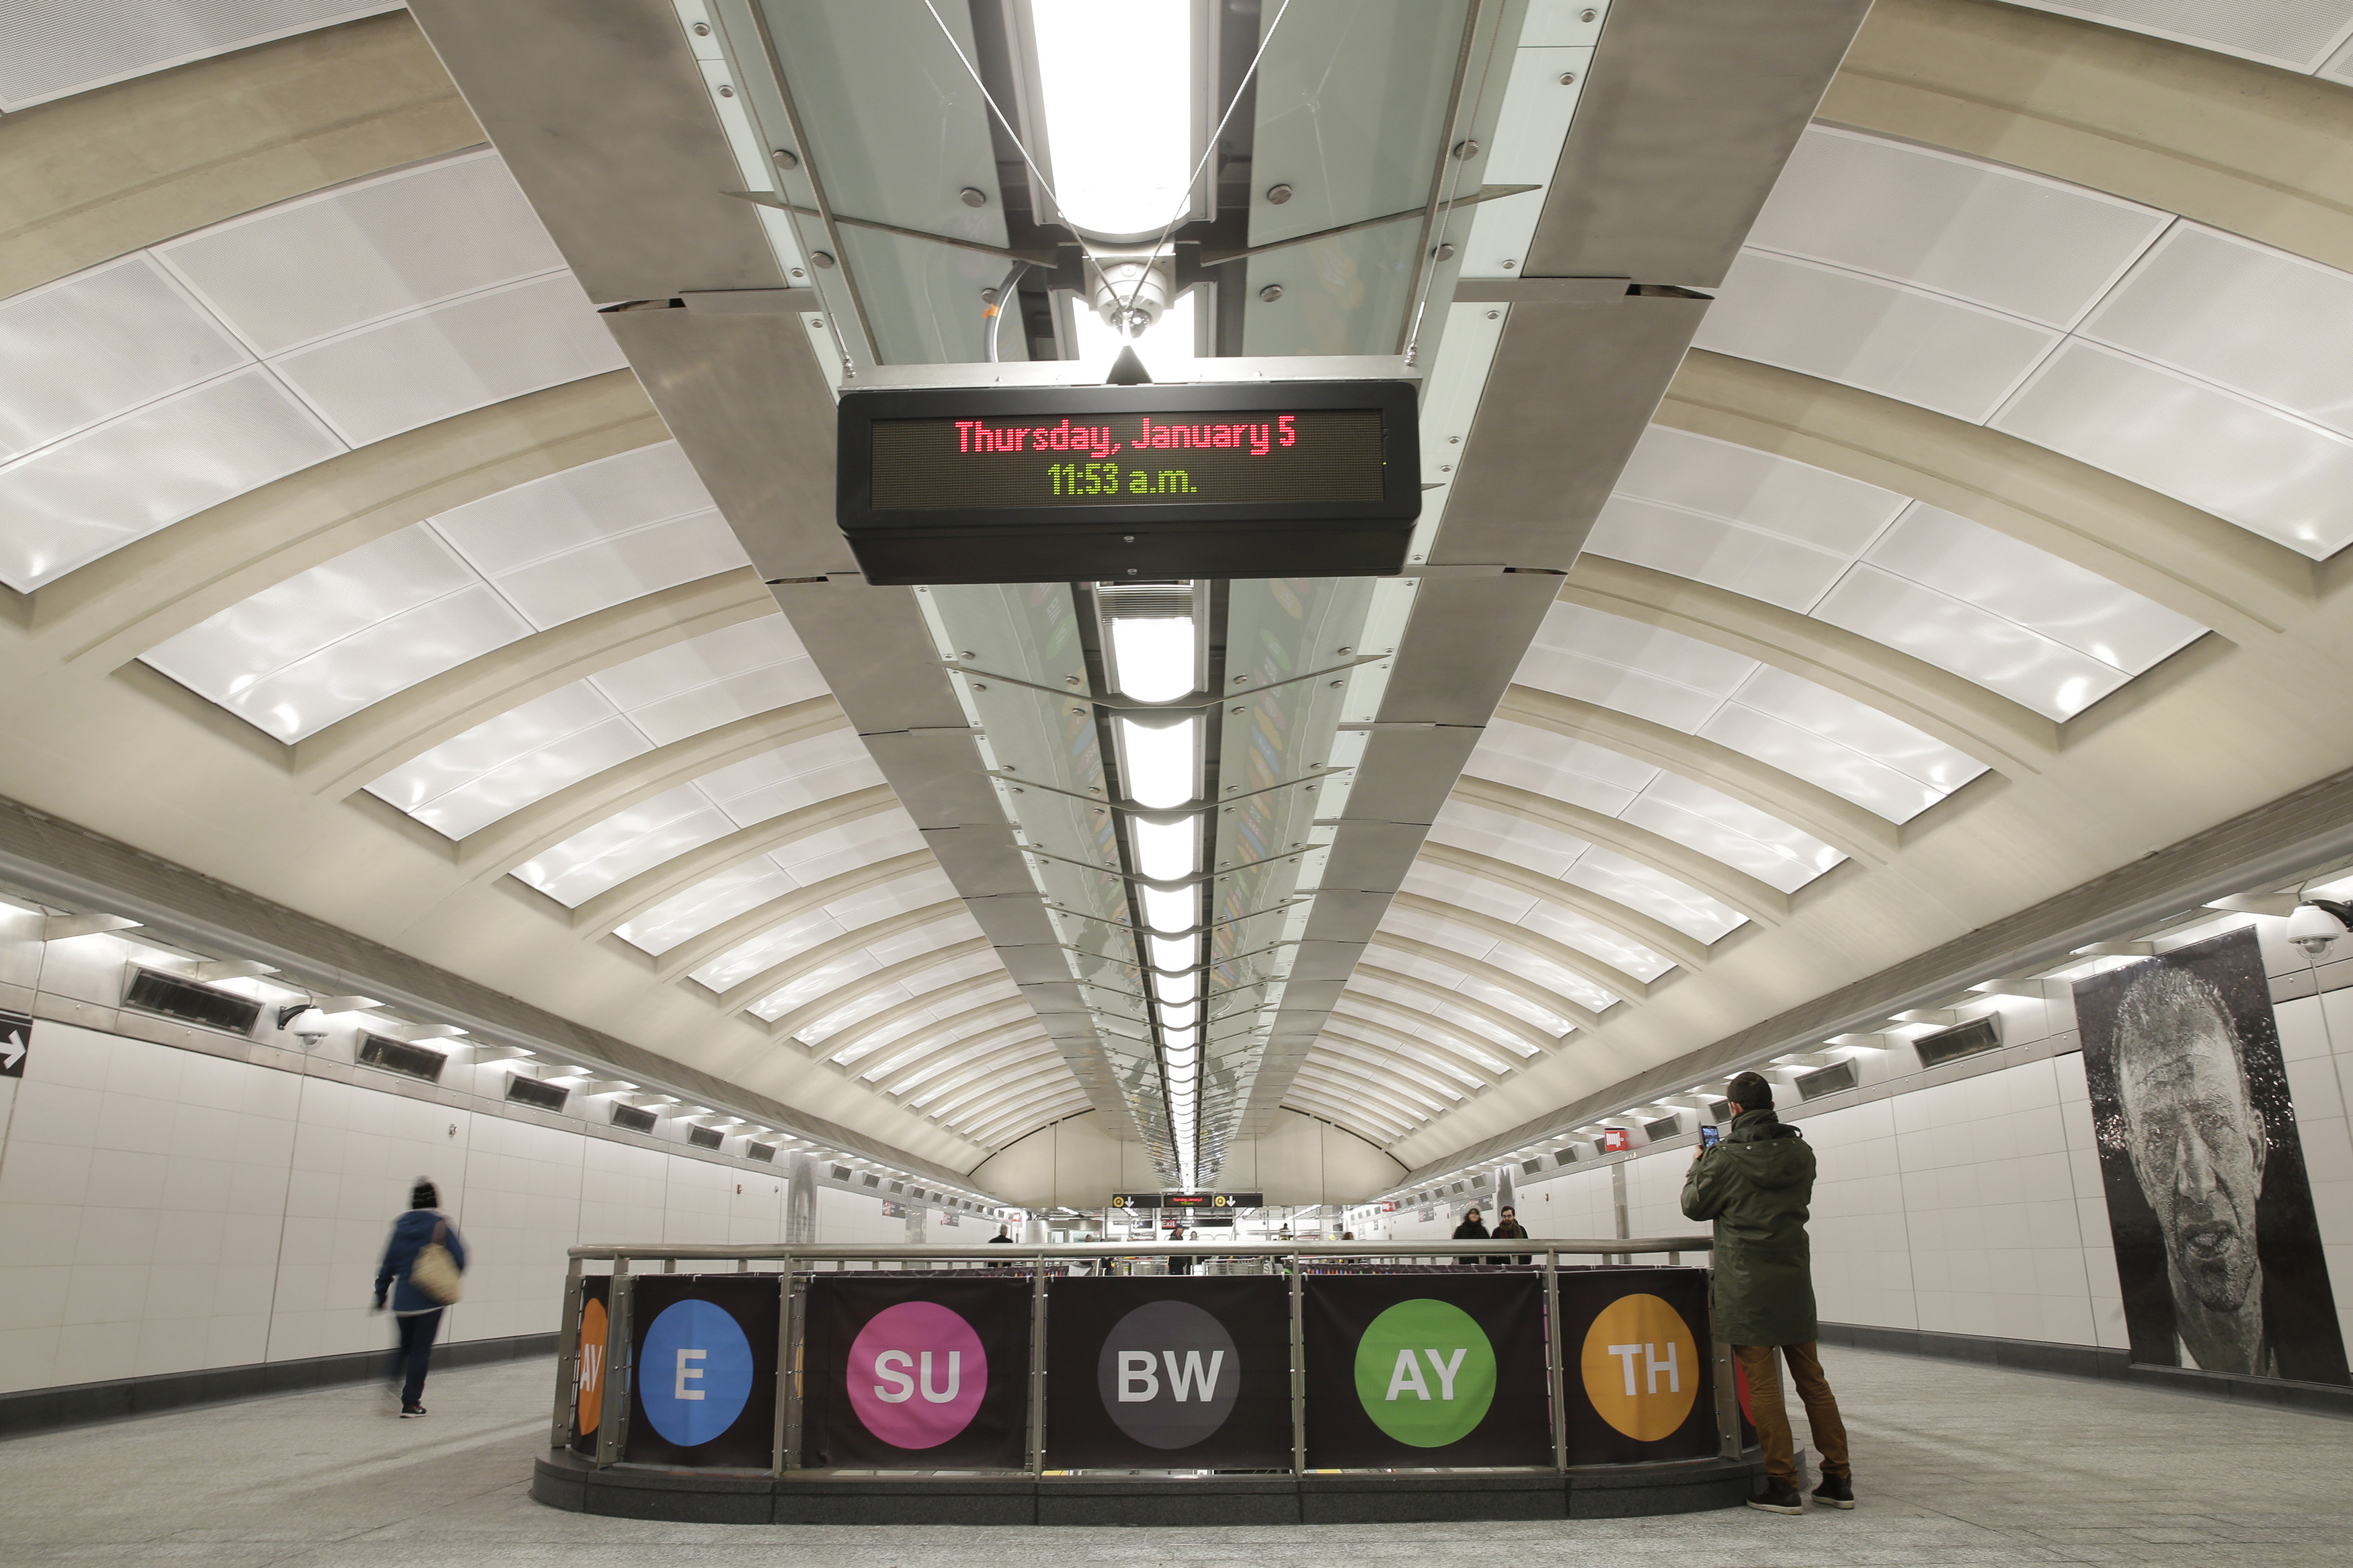 The mezzanine level of the the 86th Street Second Avenue Subway station